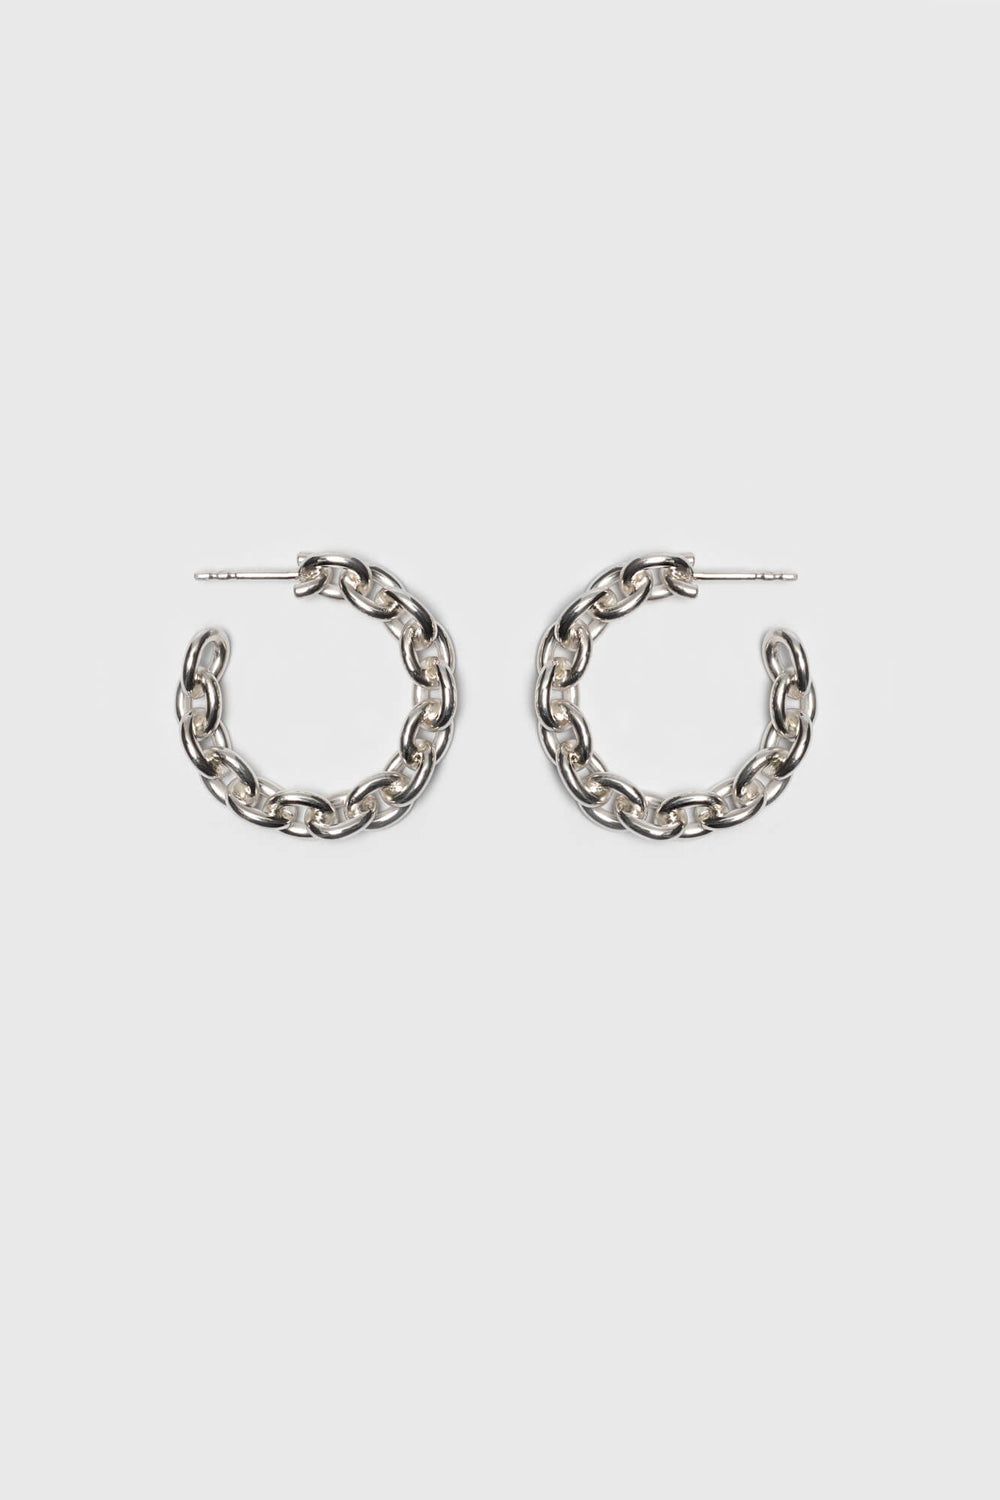 Link chain earrings with a high gloss finish. Fine jewelry handmade in Berlin.